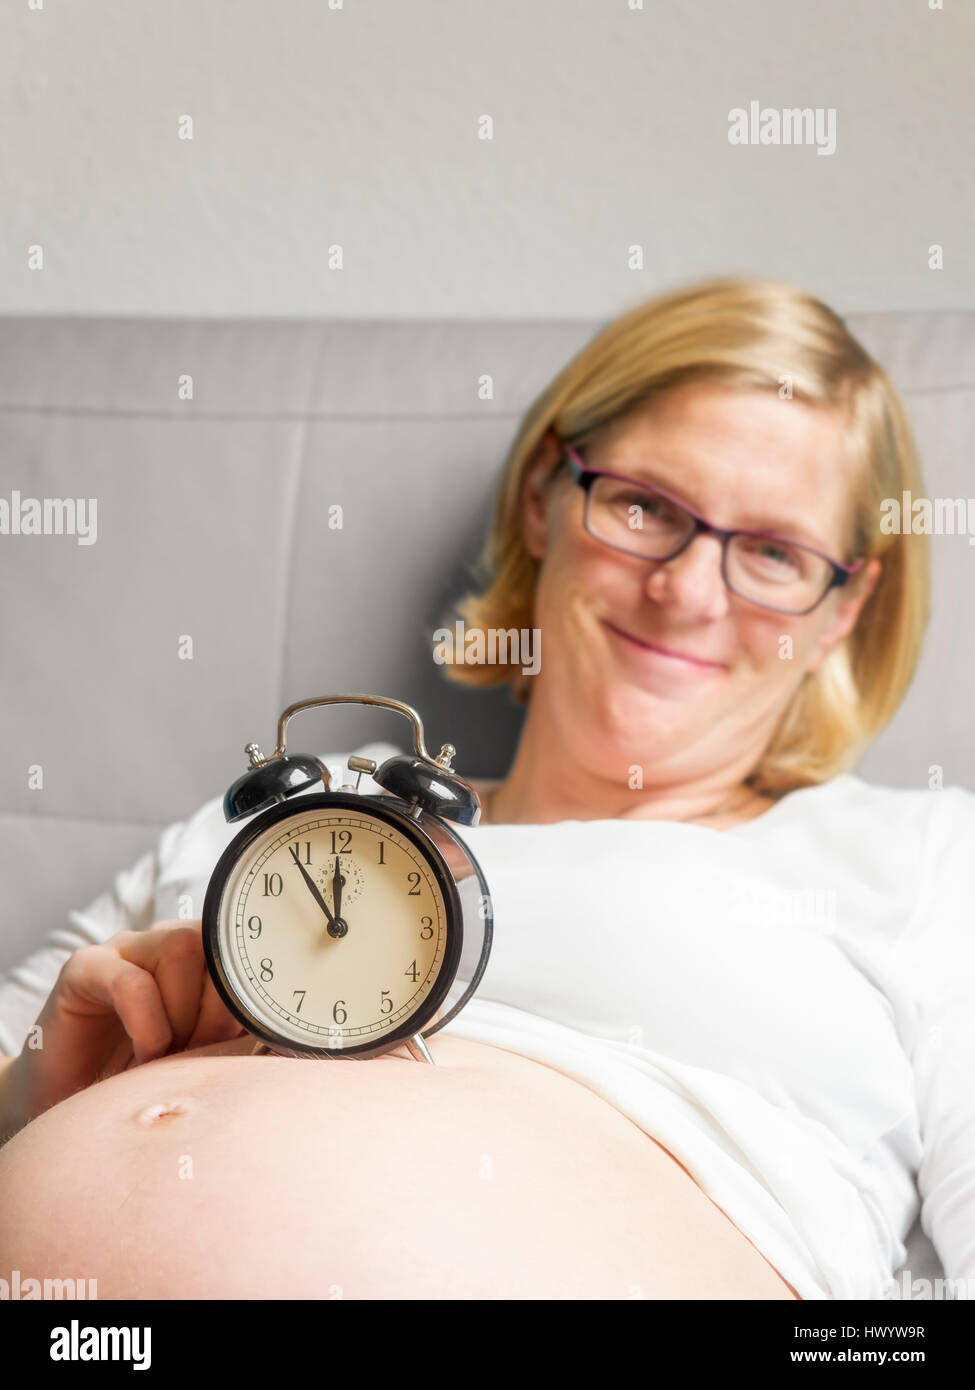 Pregnant woman with alarm clock on her belly Stock Photo